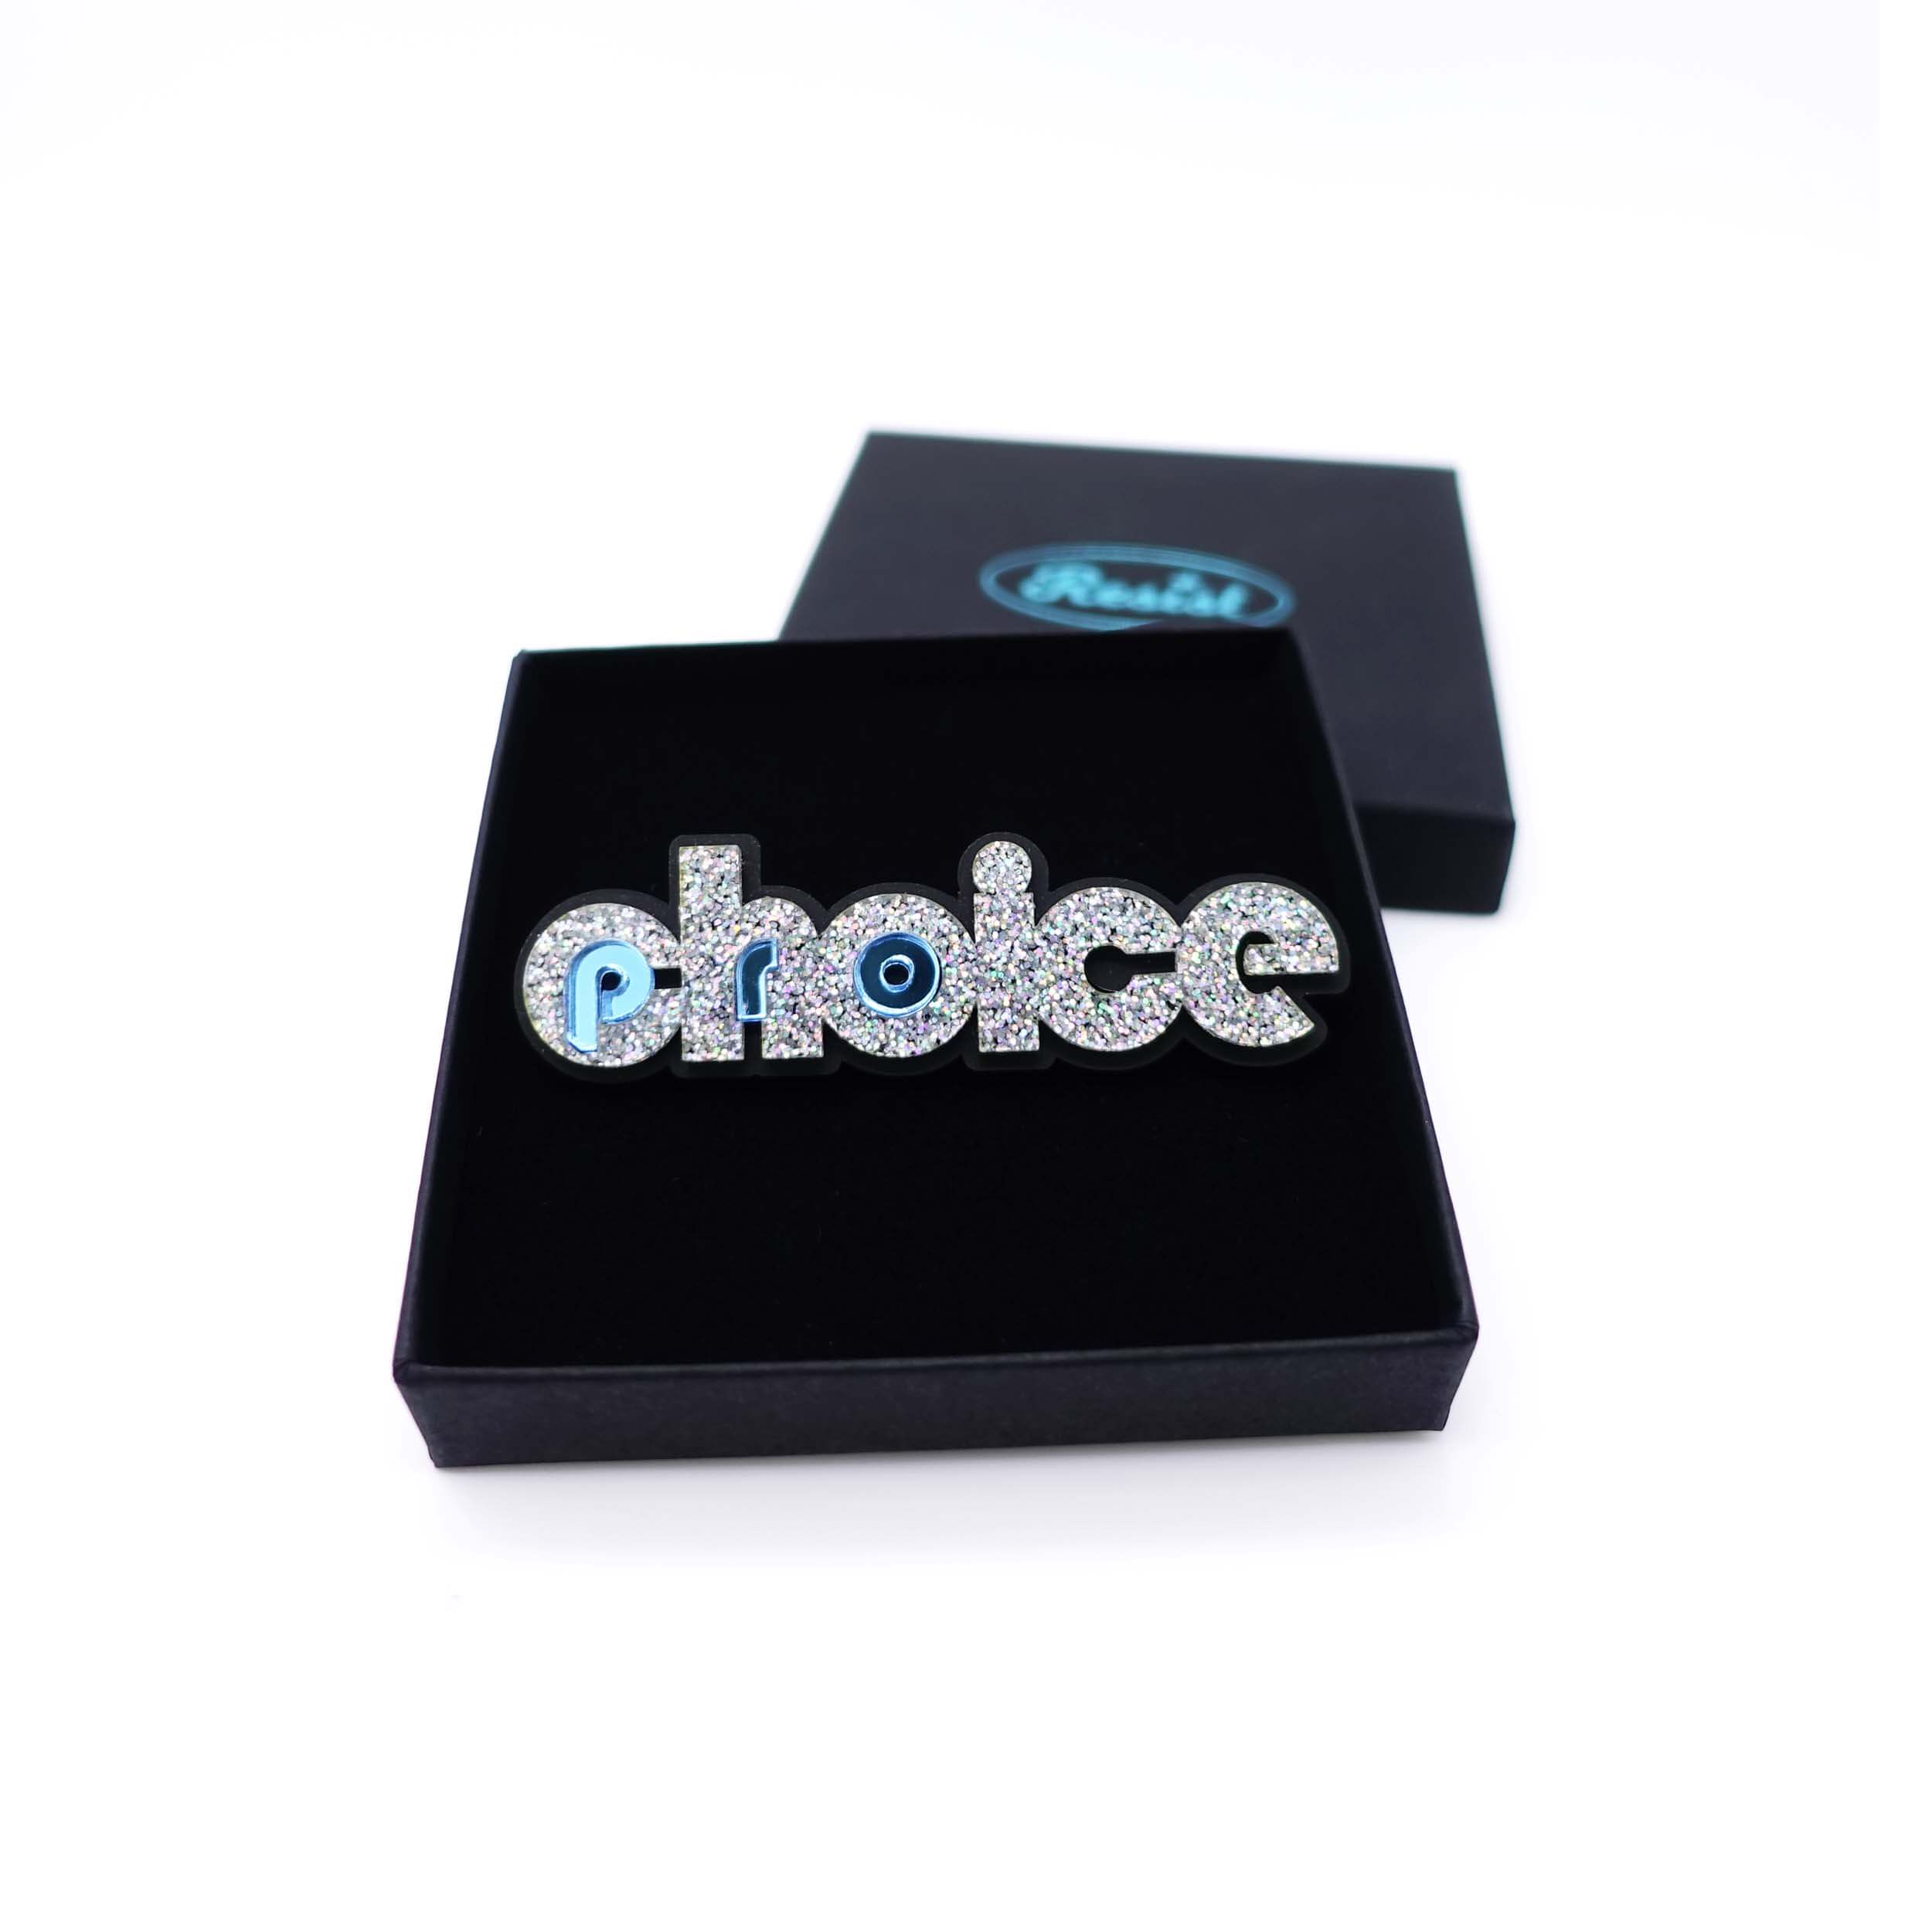 Iridescent silver glitter and sky mirror  Pro-choice brooch, designed by Sarah Day for Wear and Resist, shown in a gift box. 